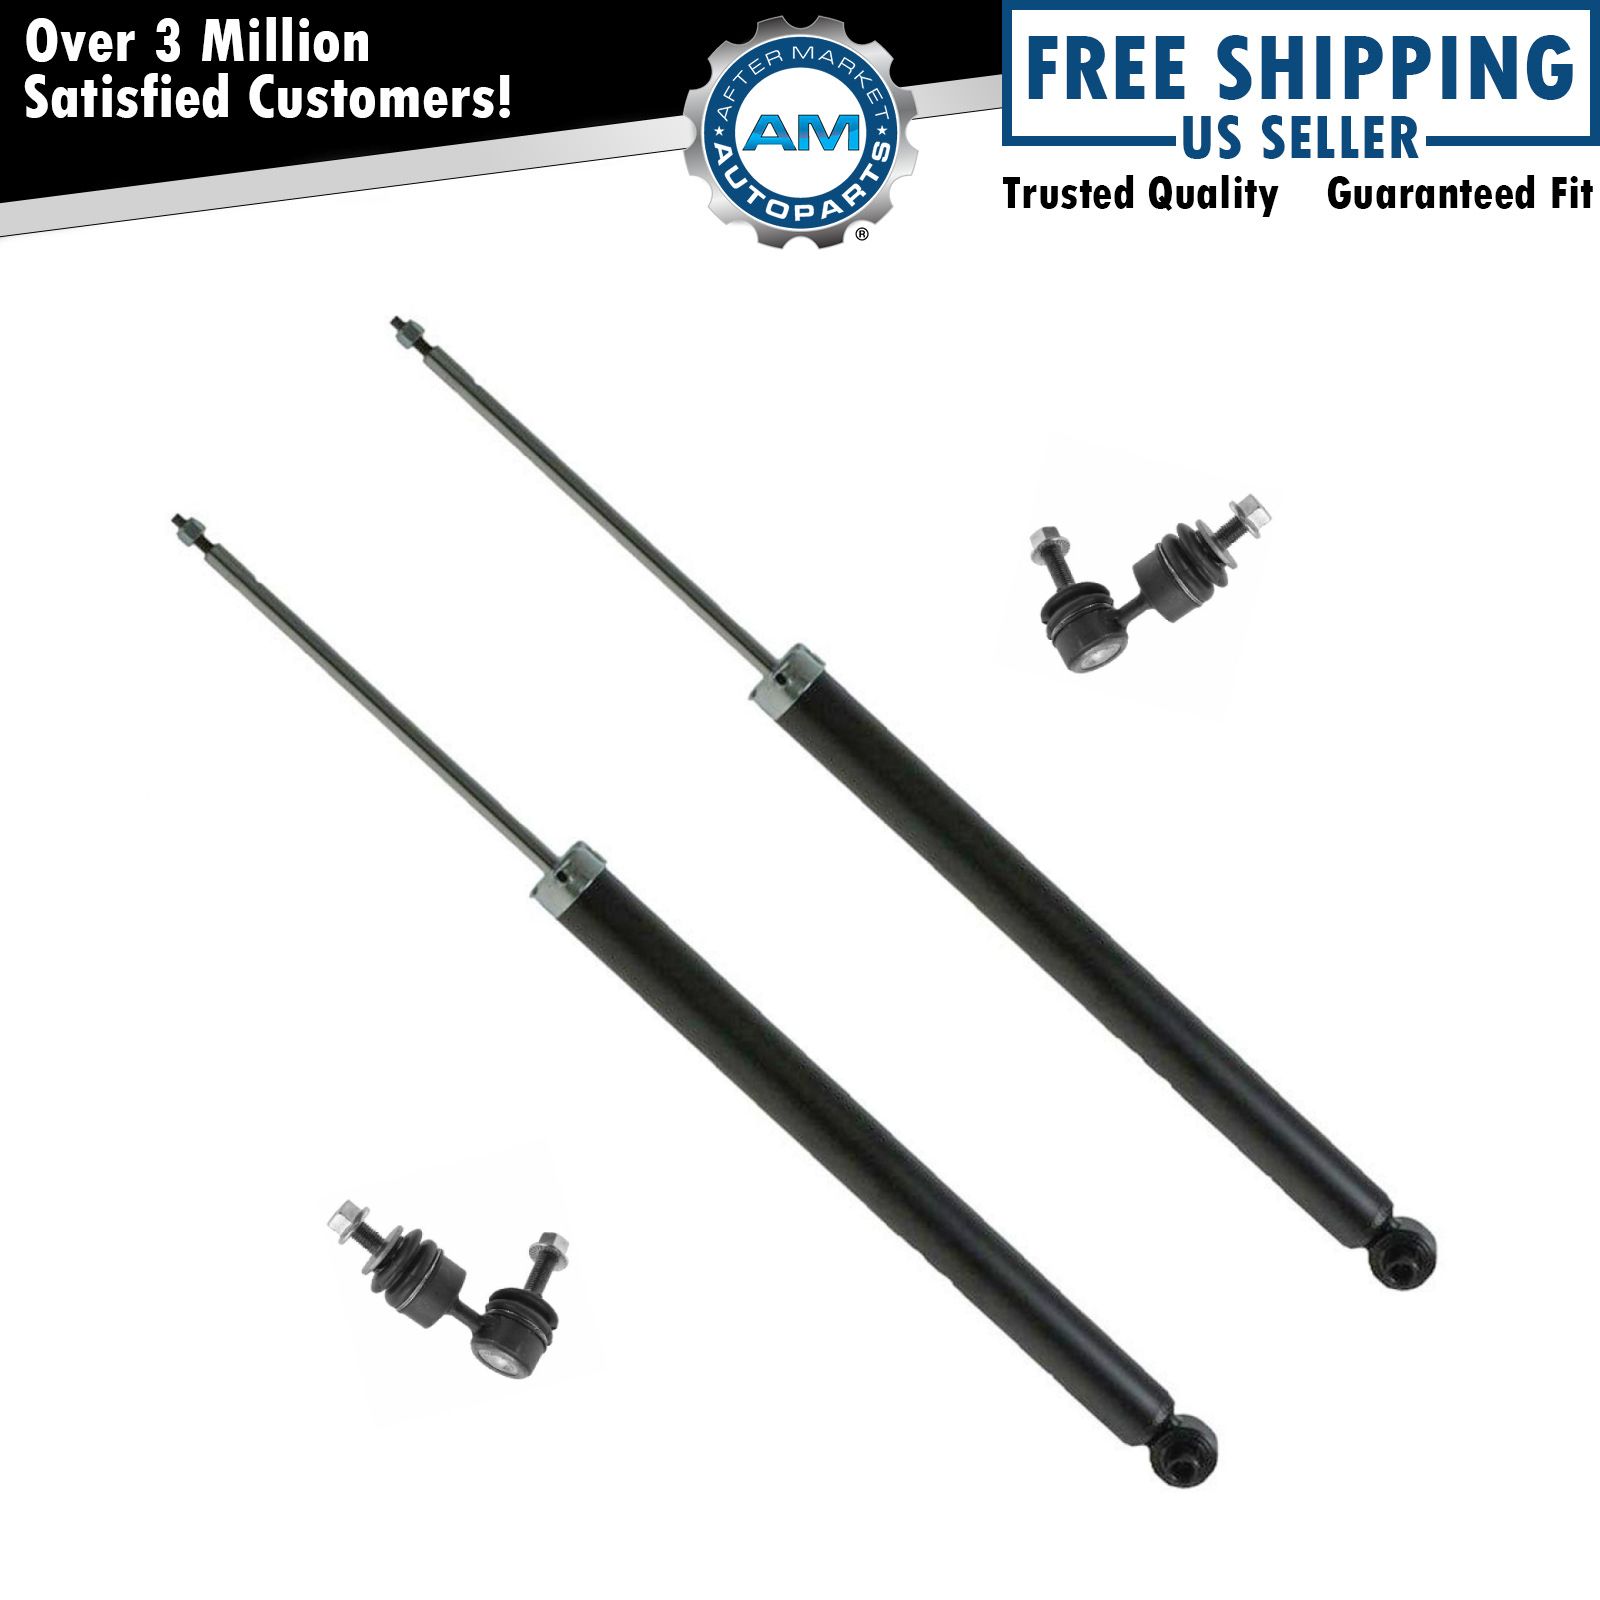 4 Piece Rear Suspension Kit Shock Absorbers w/ Sway Bar End Links for Mazda New